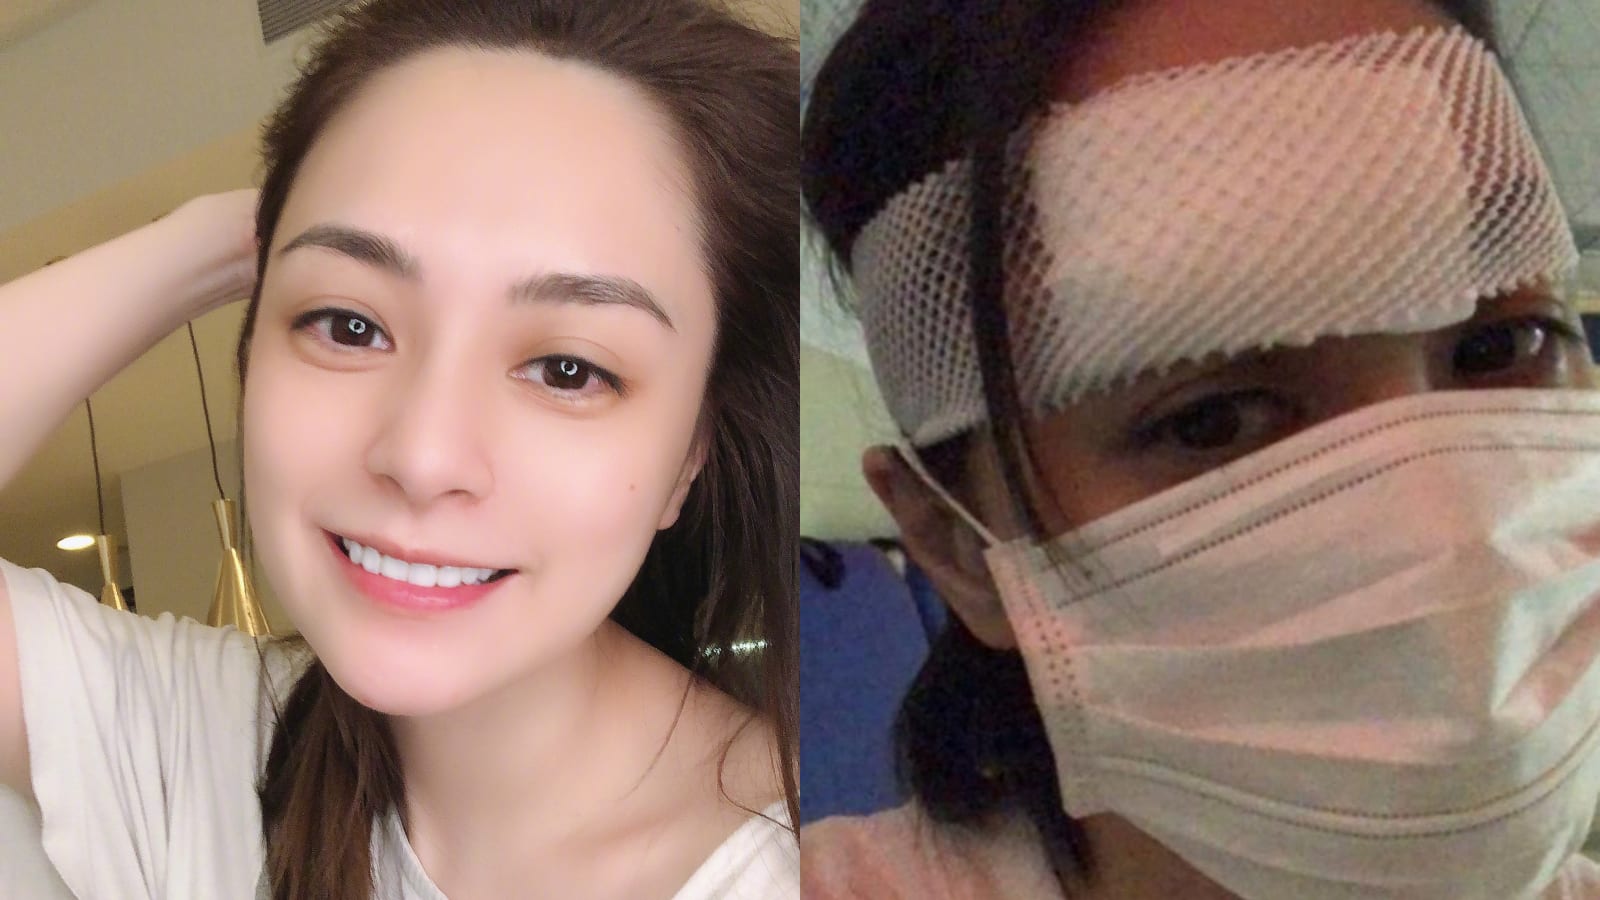 More Details About Gillian Chung’s Hotel Room Accident, Which Left Her With A 6cm Wound On Her Head